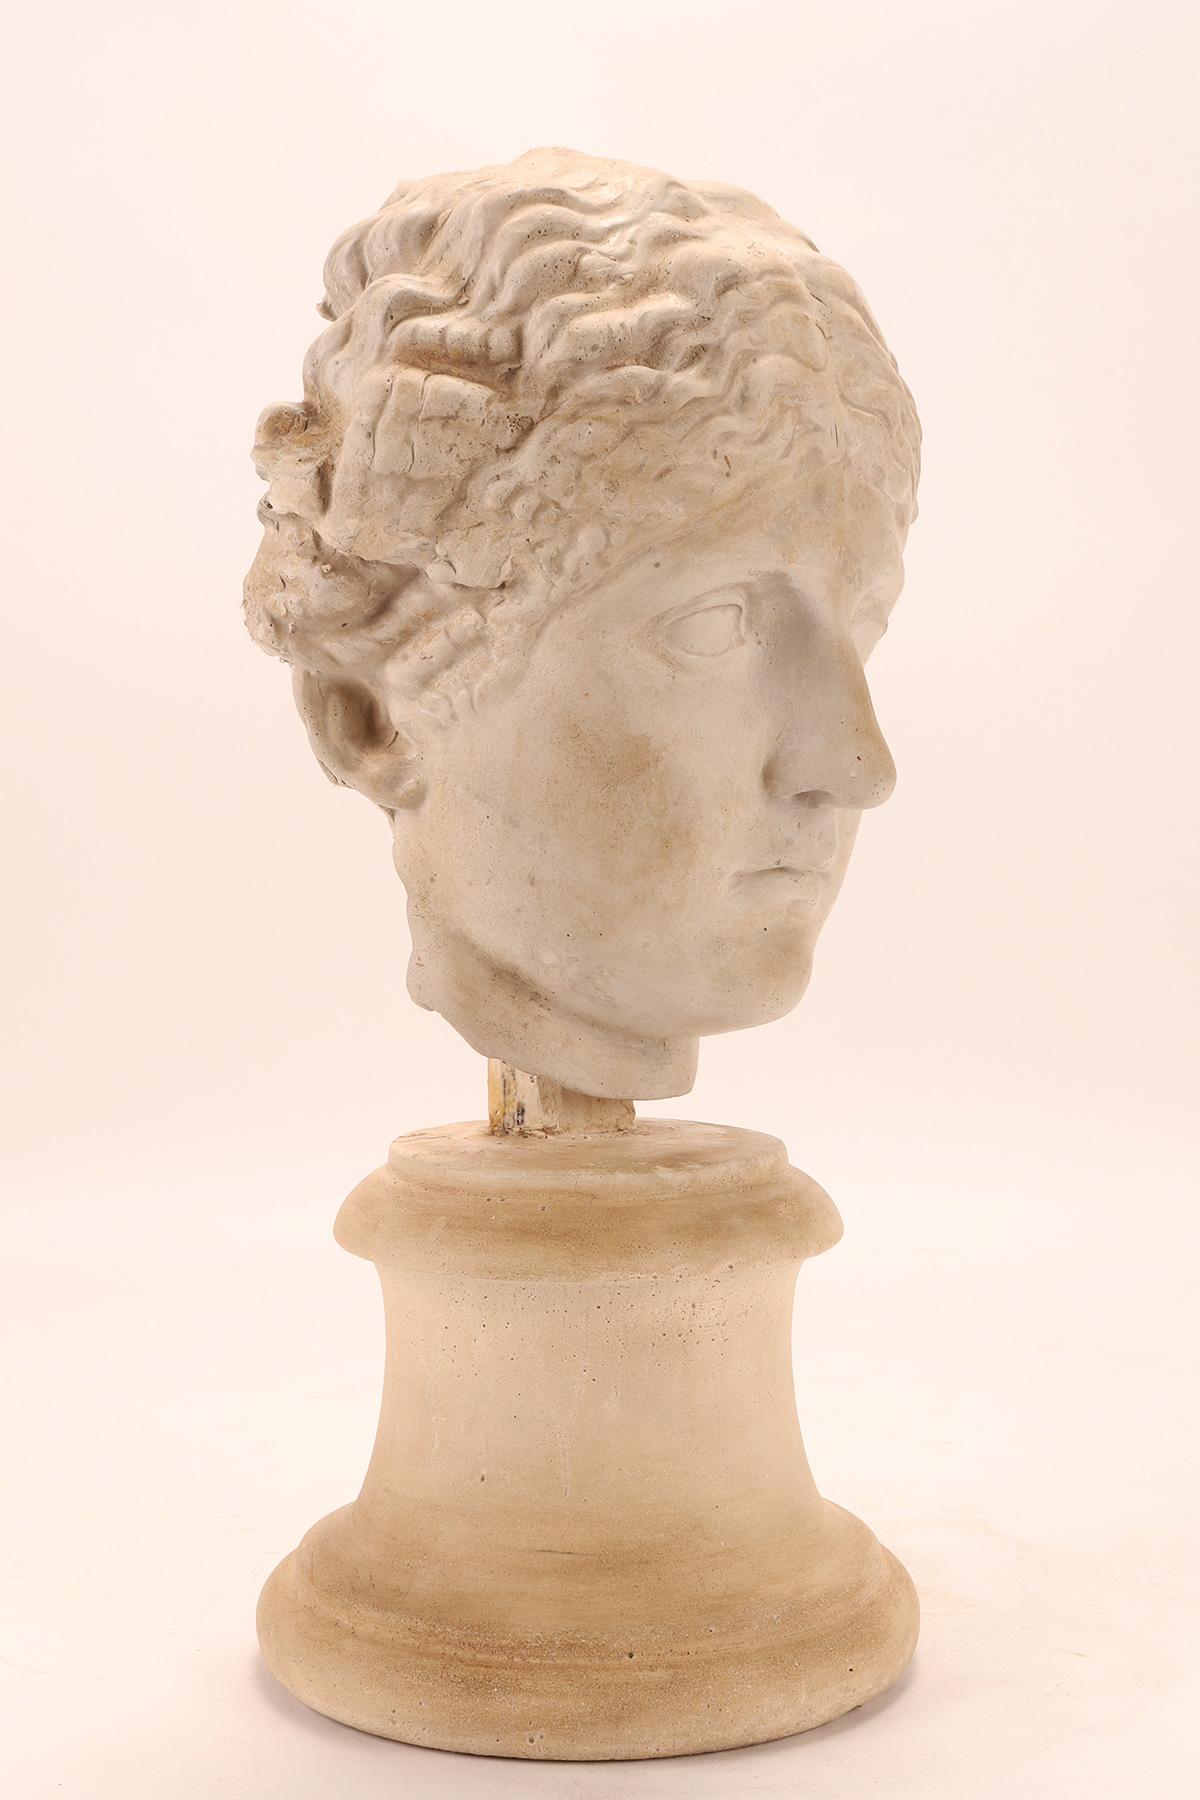 Above the plaster base, by means of a wooden support, the cast of the head of a Roman woman is set. Cast for the teaching drawing in the academy. Italy circa 1890.